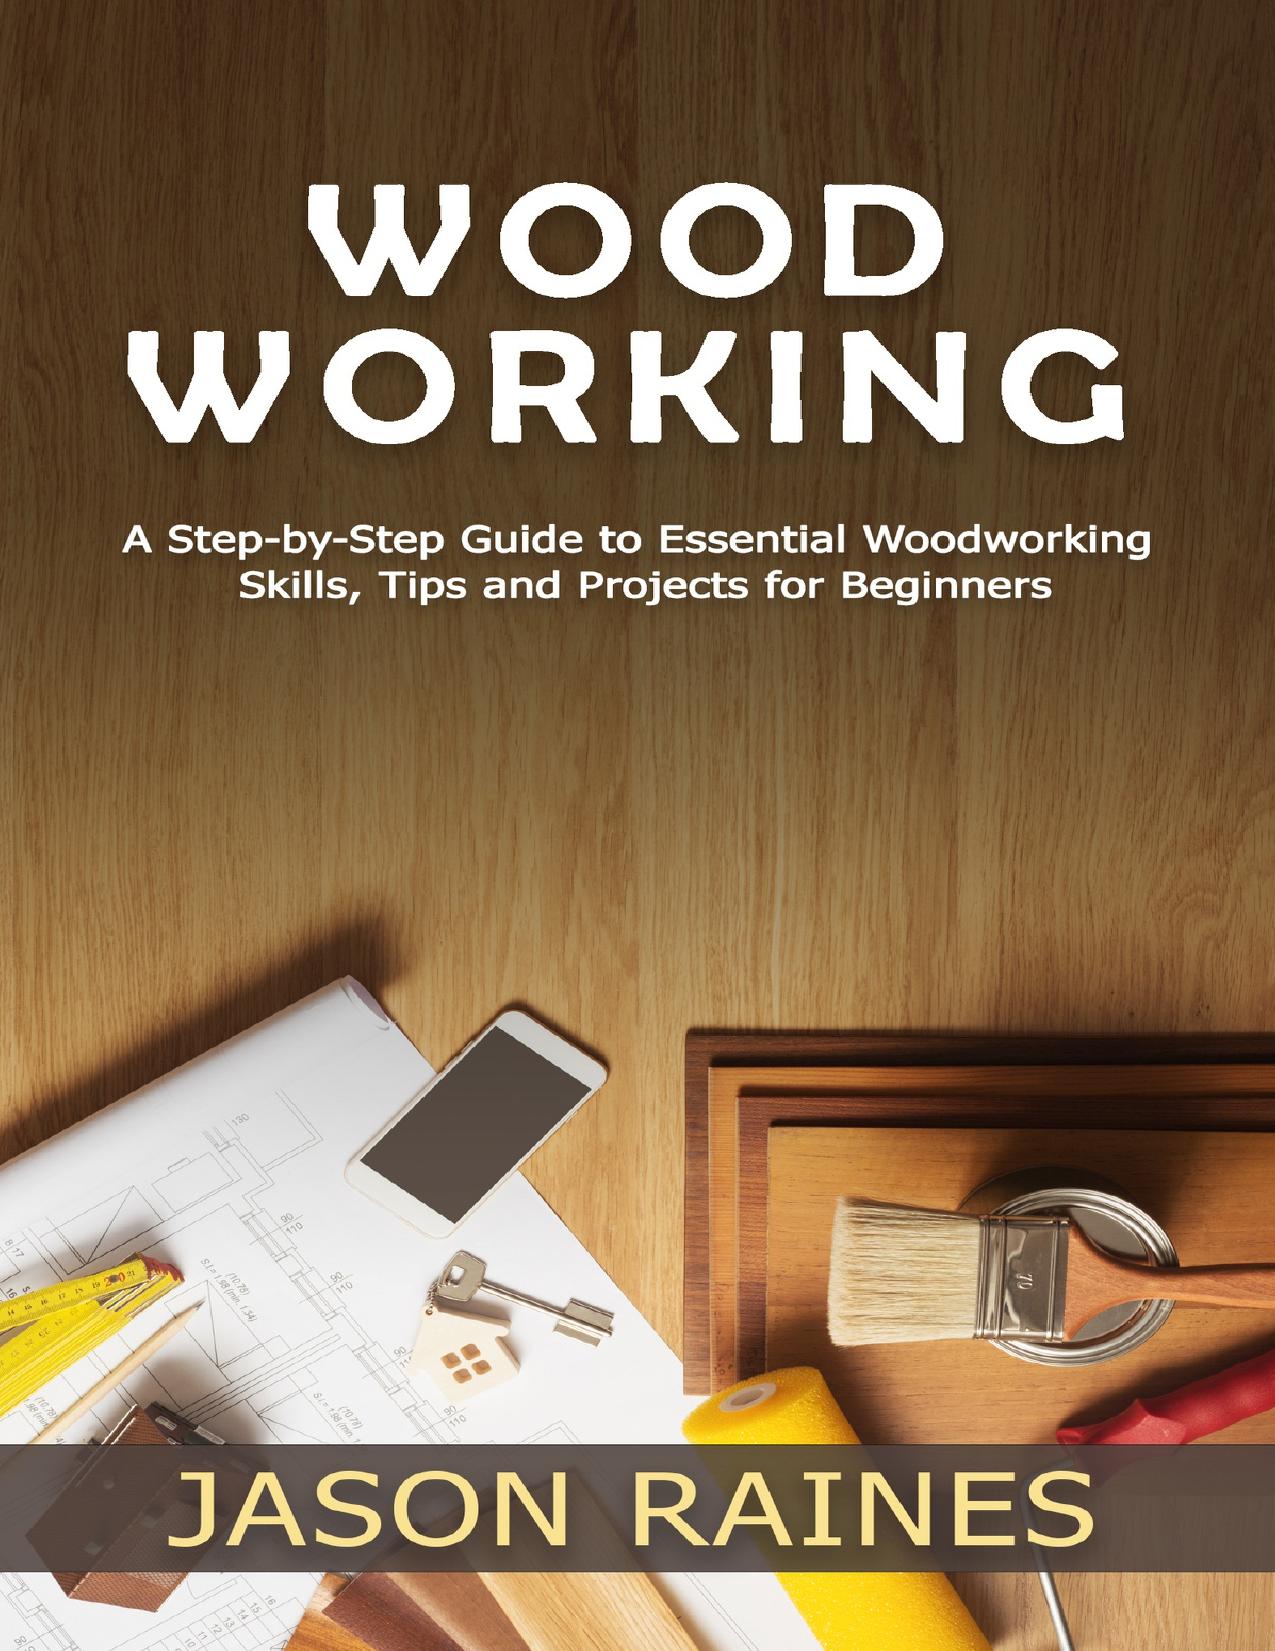 Woodworking: A Step-by-Step Guide to Essential Woodworking Skills, Tips and Projects for Beginners by Raines Jason